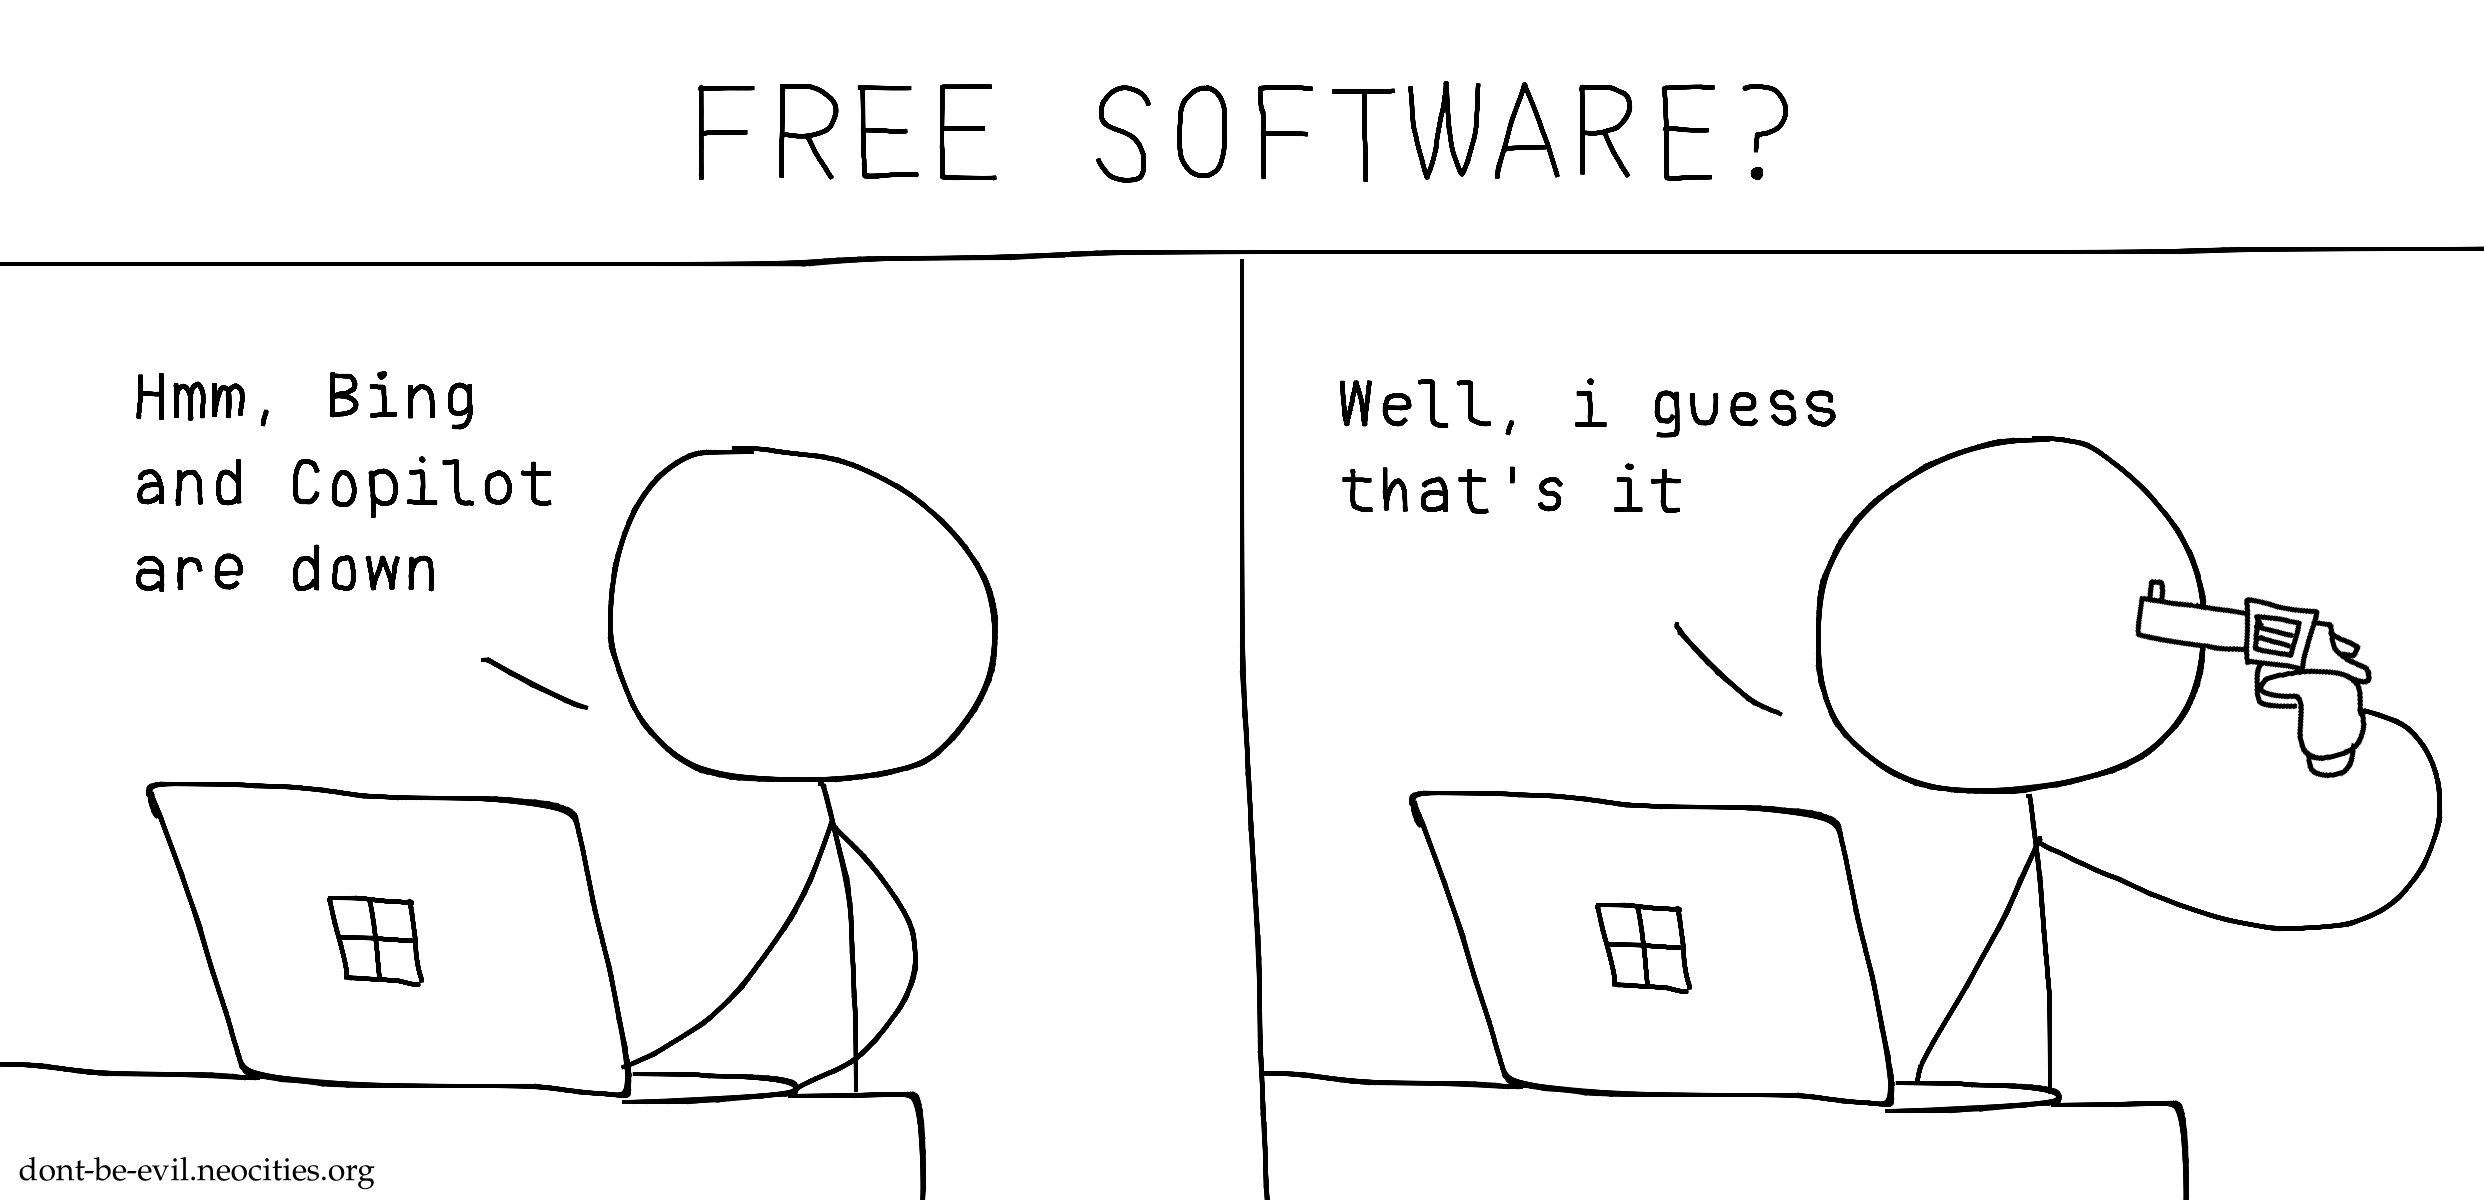 Free Software?